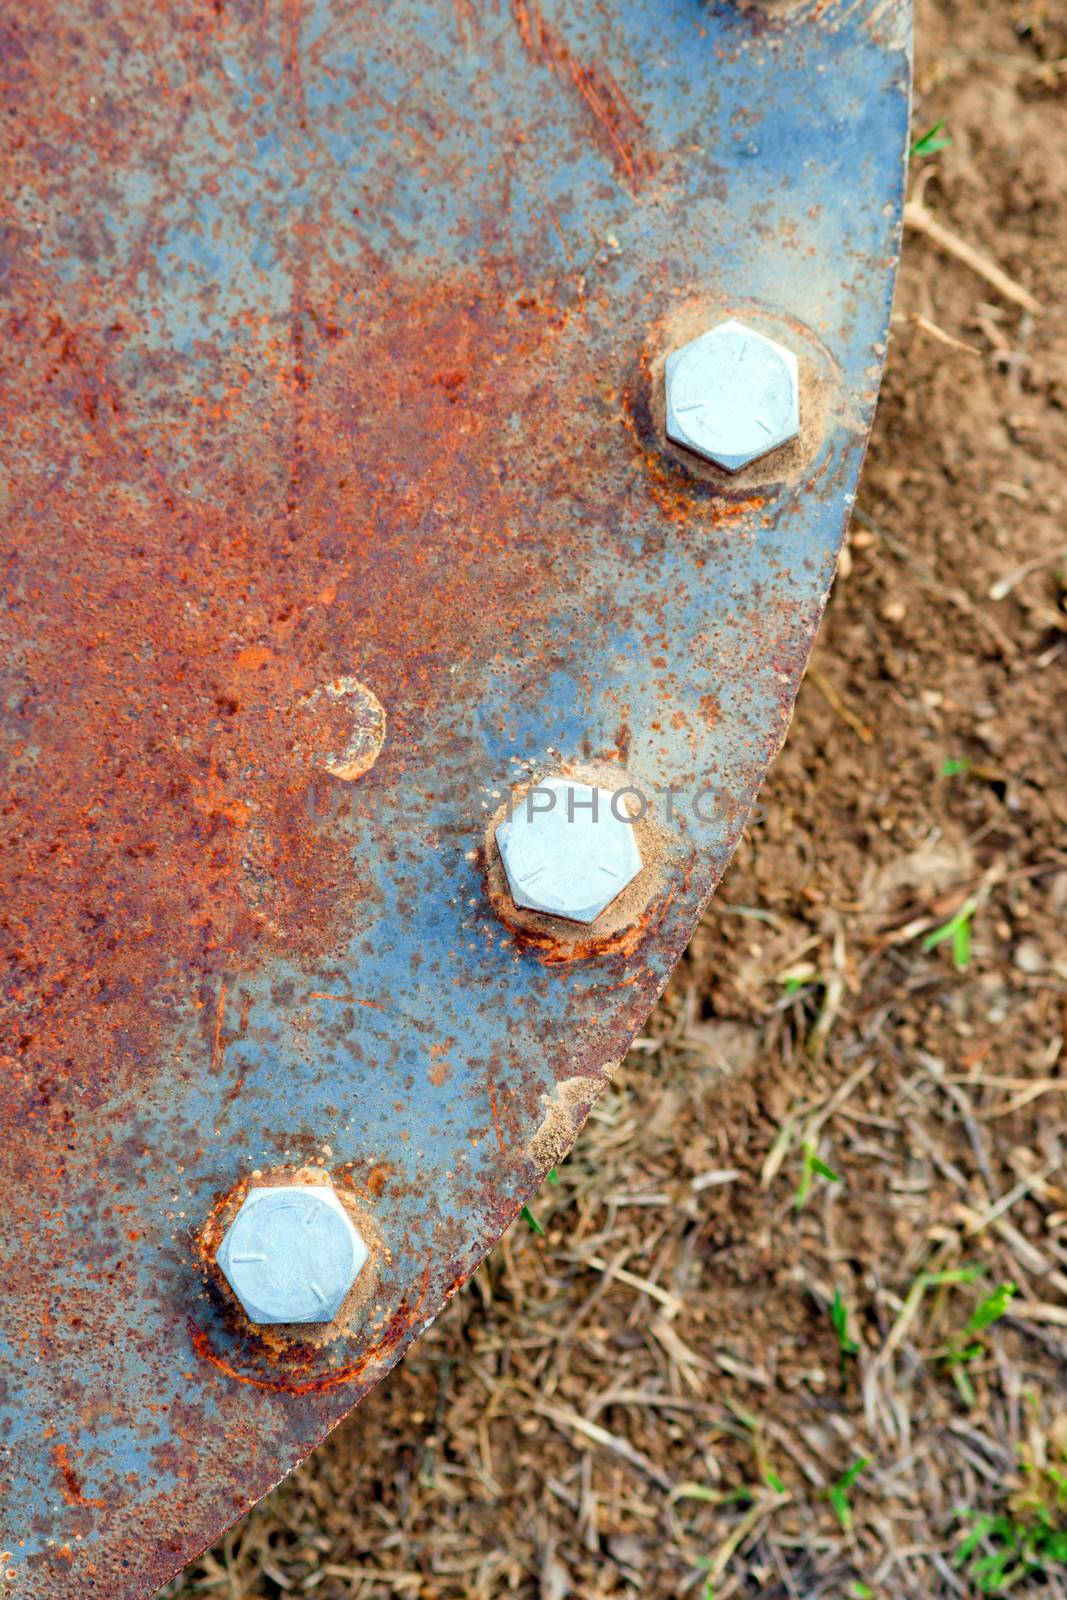 Strong Bolts Hold Rusted Manhole Cover Ground Level Dirt by ChrisBoswell